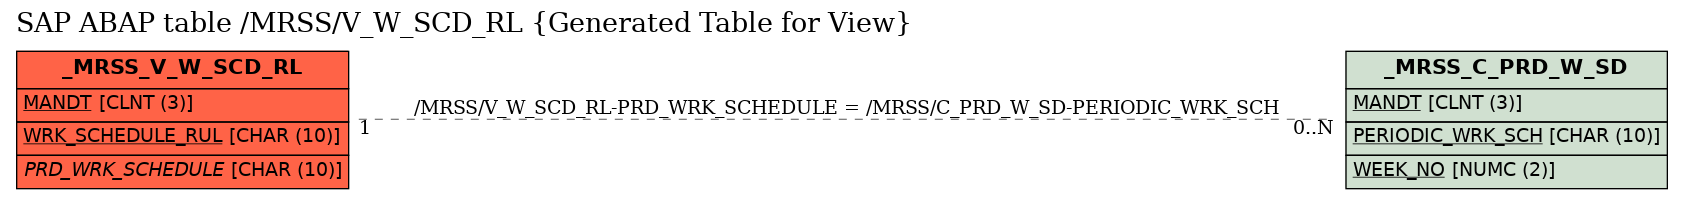 E-R Diagram for table /MRSS/V_W_SCD_RL (Generated Table for View)